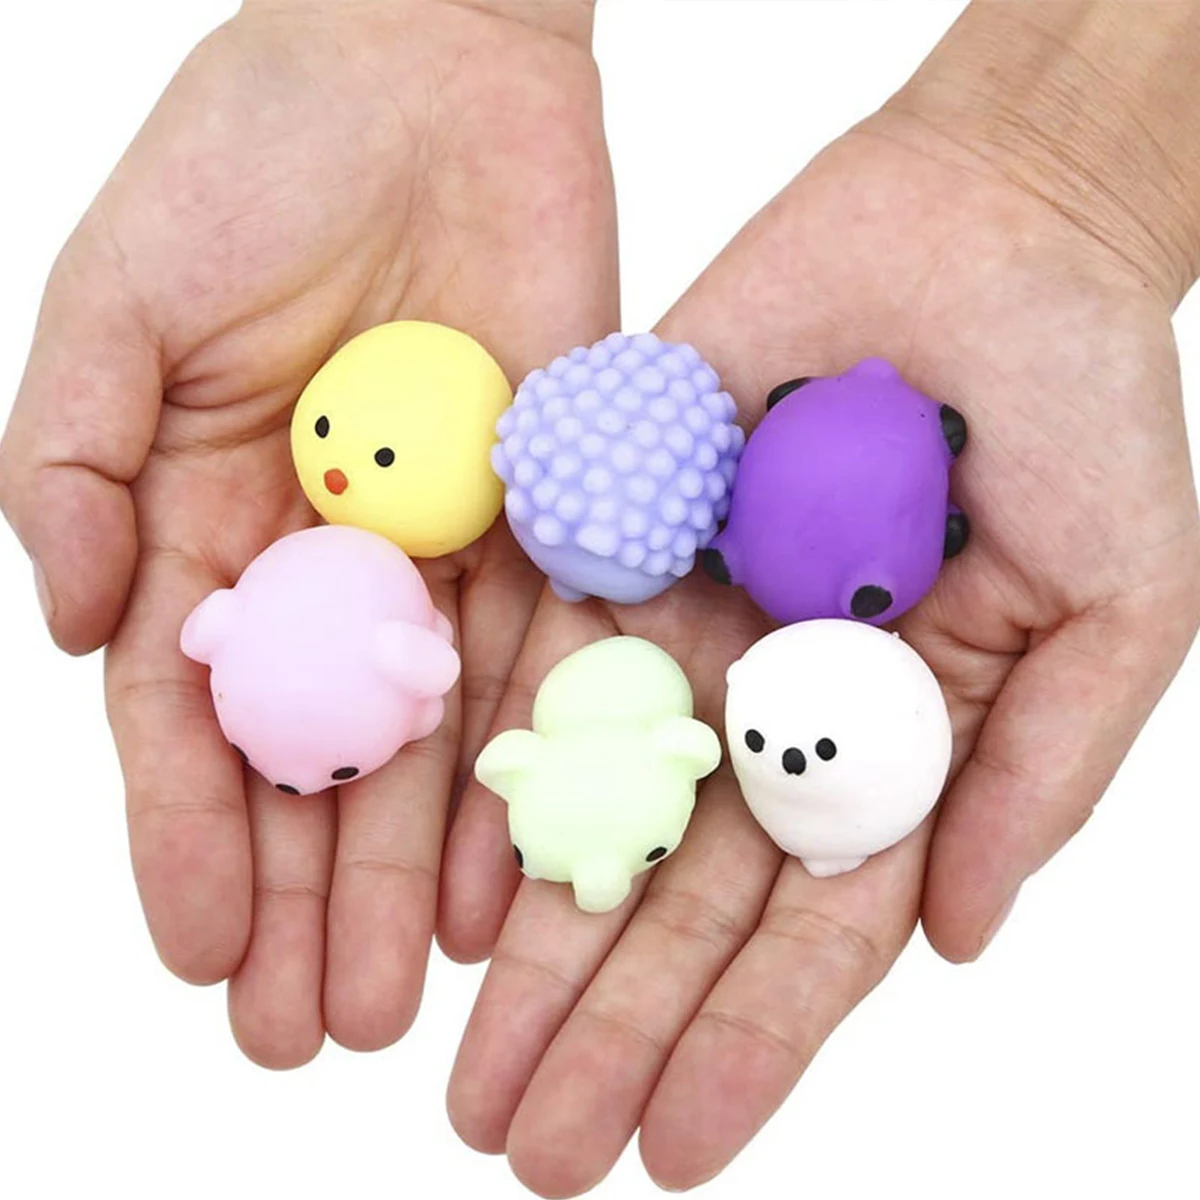 fidget squishy balls 24pcs Fidget Toys Party Favors Squishy Toy Kids Party Favors Mini Kawaii Squishies Mochi Stress Reliever Anxiety Toys stress relieving ball